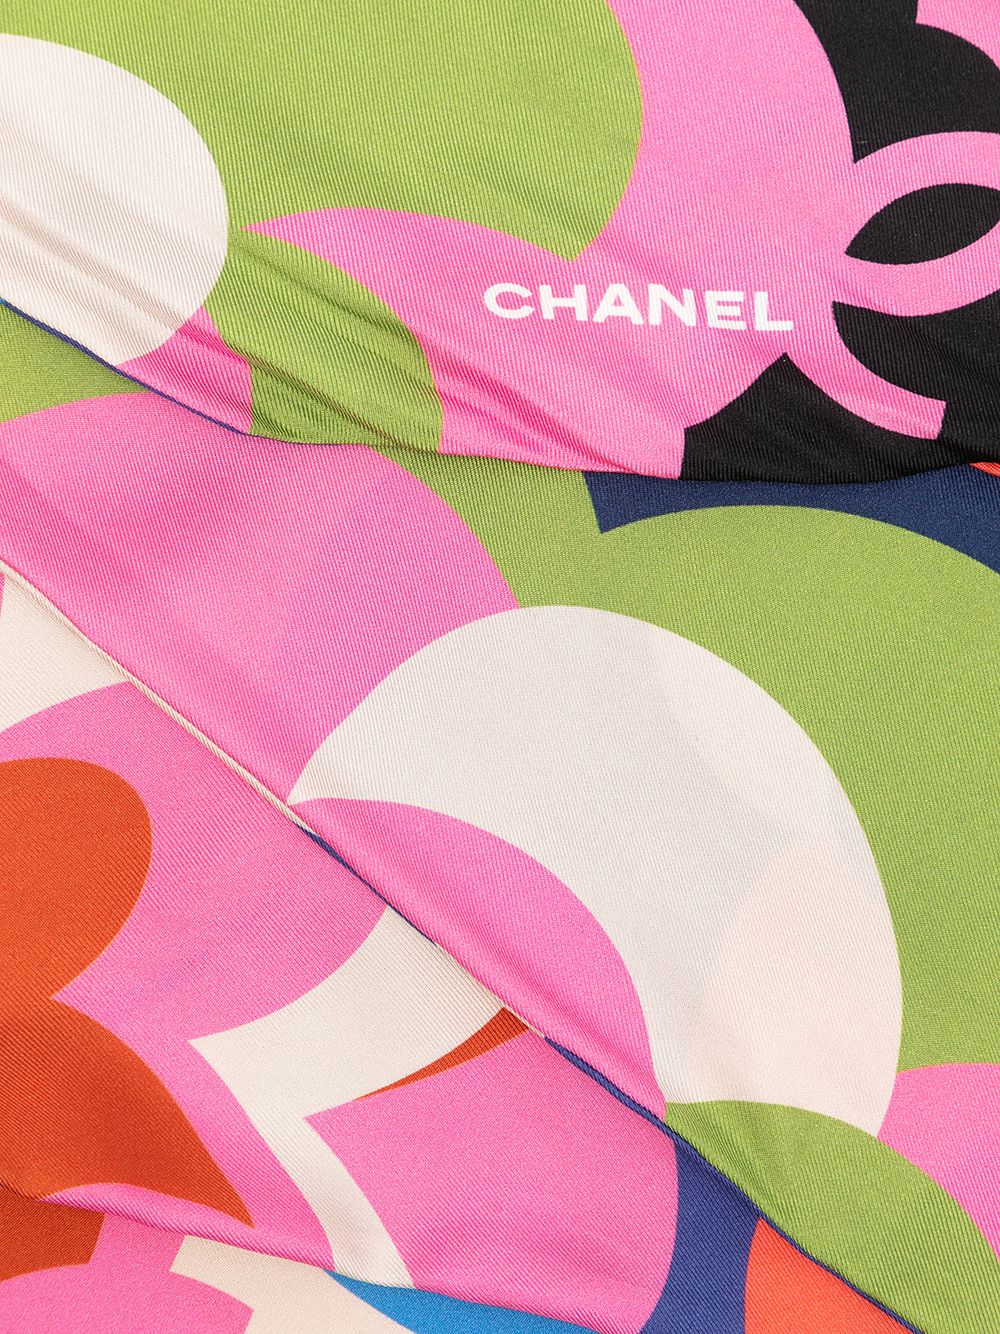 Chanel Silk Twill CC Bandeau Scarf - New in Box - The Consignment Cafe